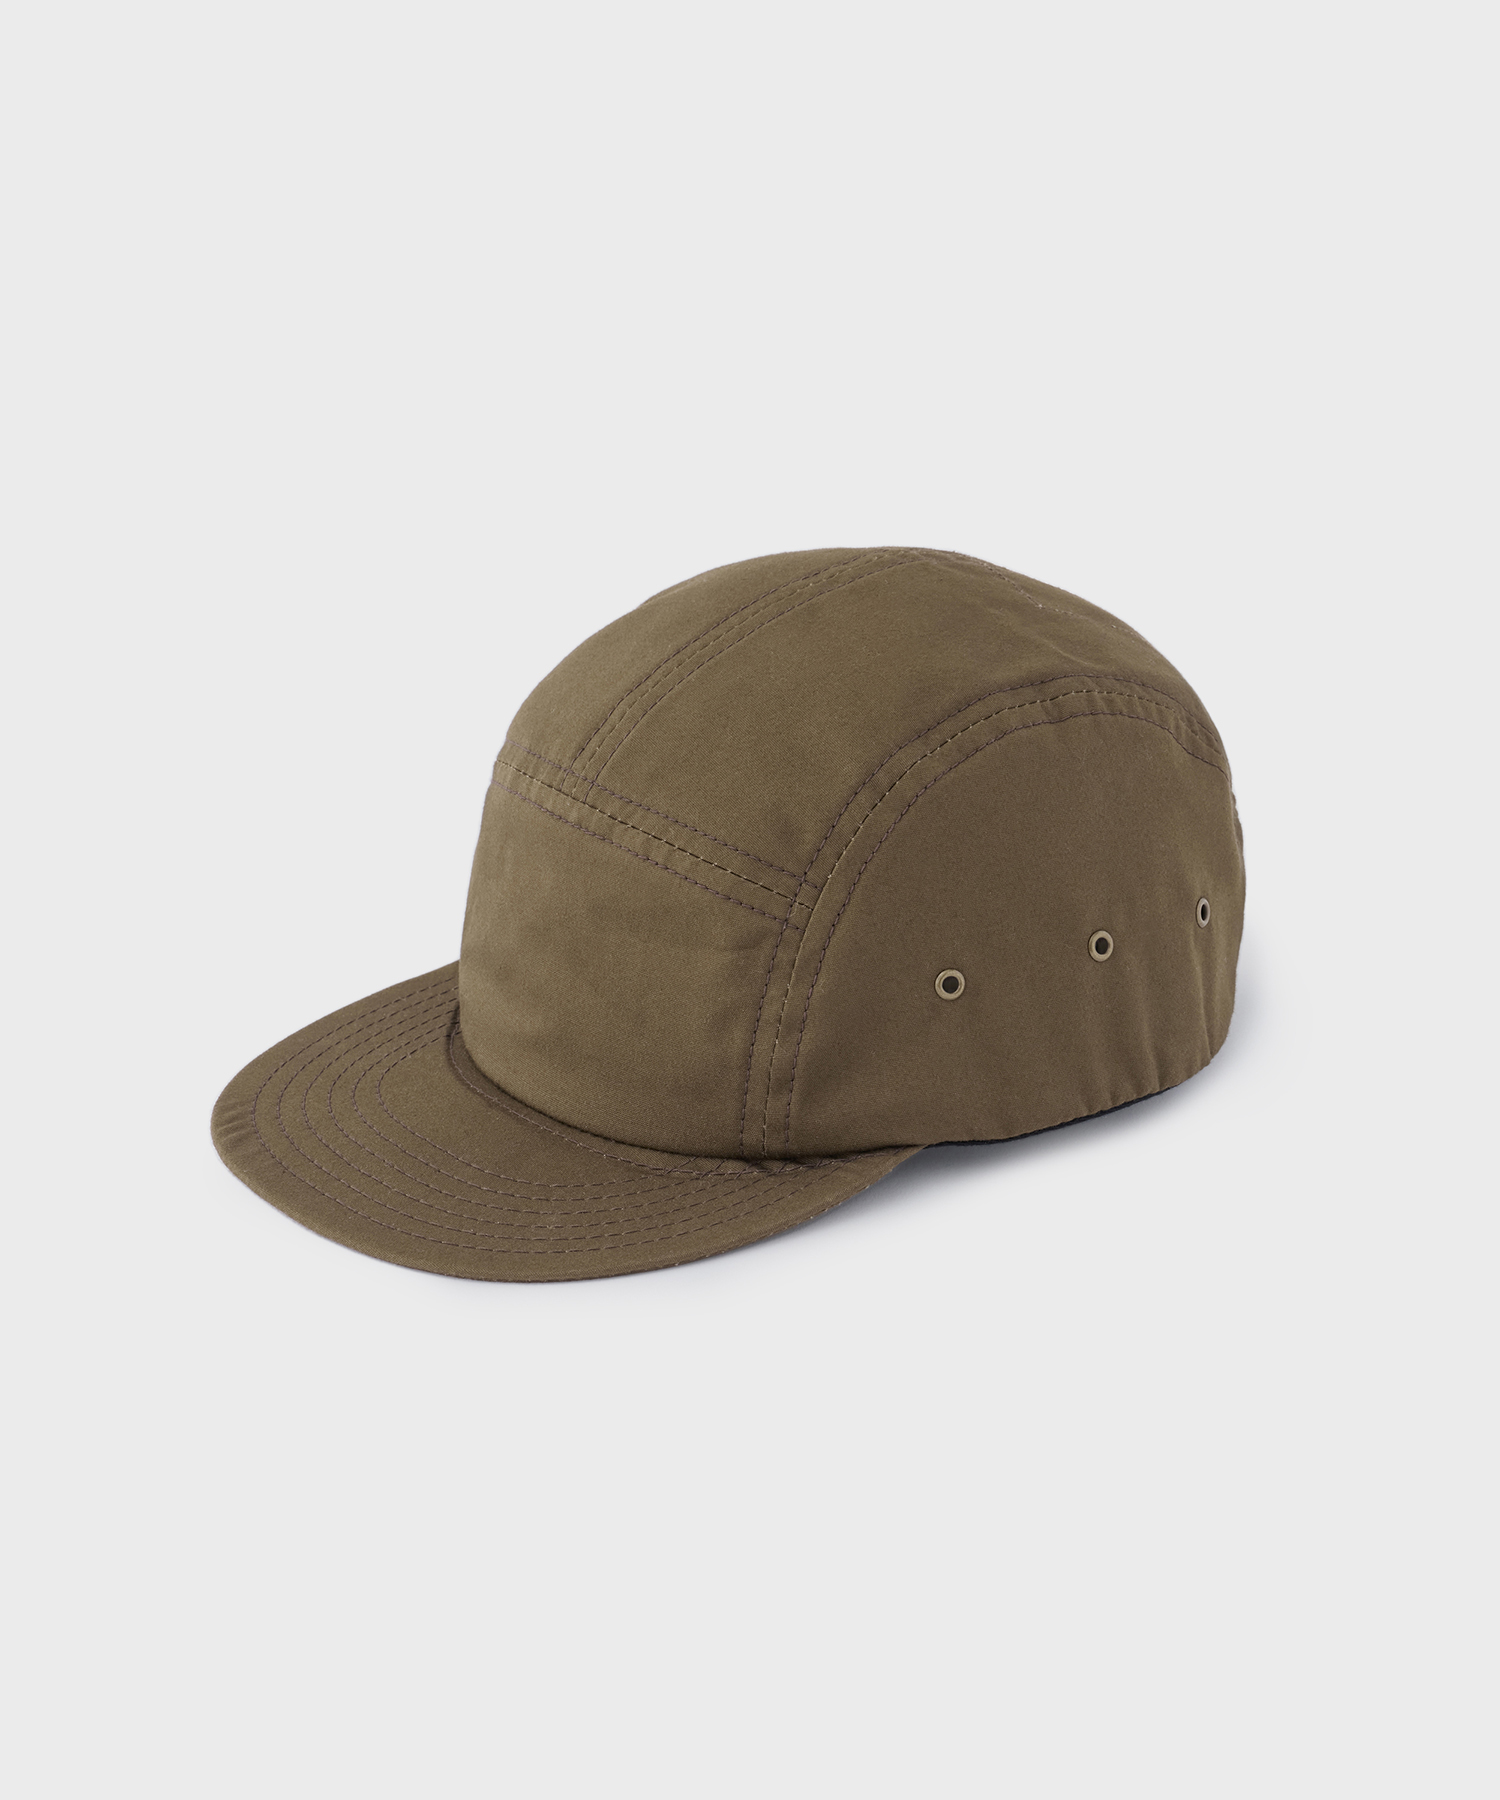 RACAL for A/O. Exclusive Flip Up Jet Ventile Cap (Brown)